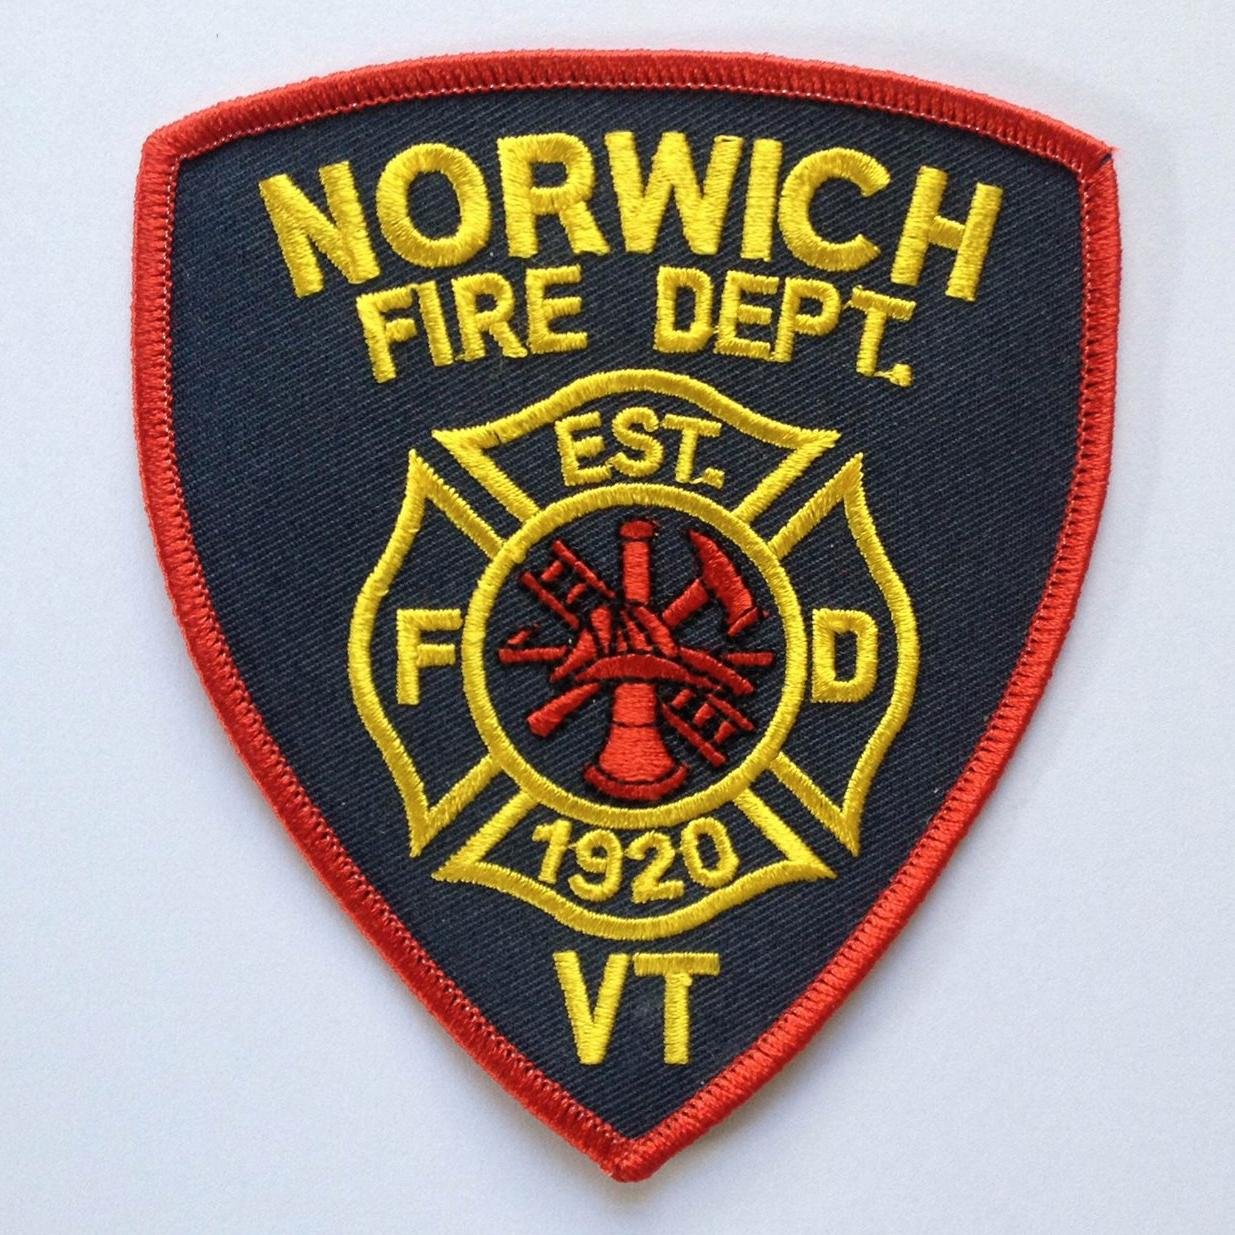 The NFDs mission is to protect life, property & the environment, by providing fire suppression, rescue, ems, hazmat, education services.#norwich #firedepartment